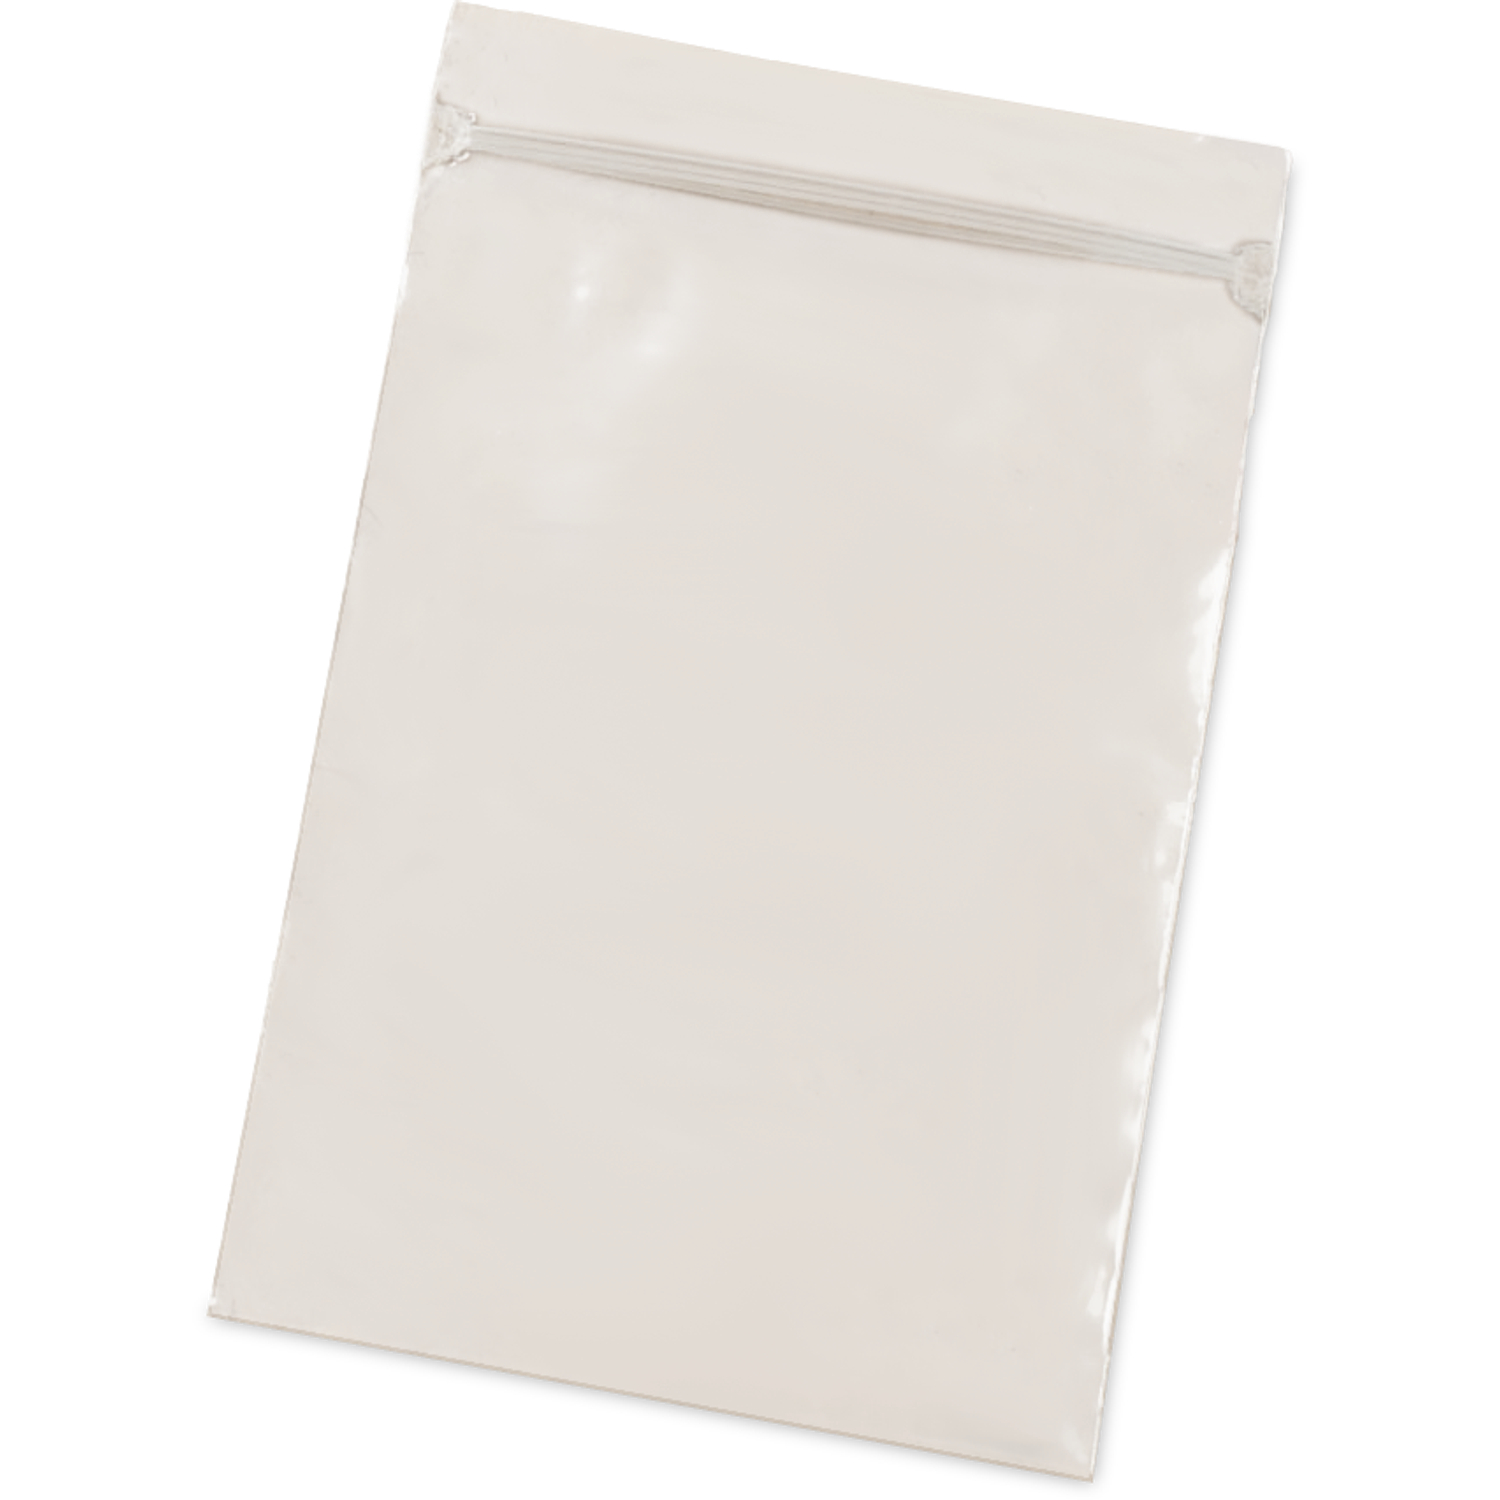 Zip Lock/Resealable Bags 9x12 or Gallon - PennFlo Imports Limited